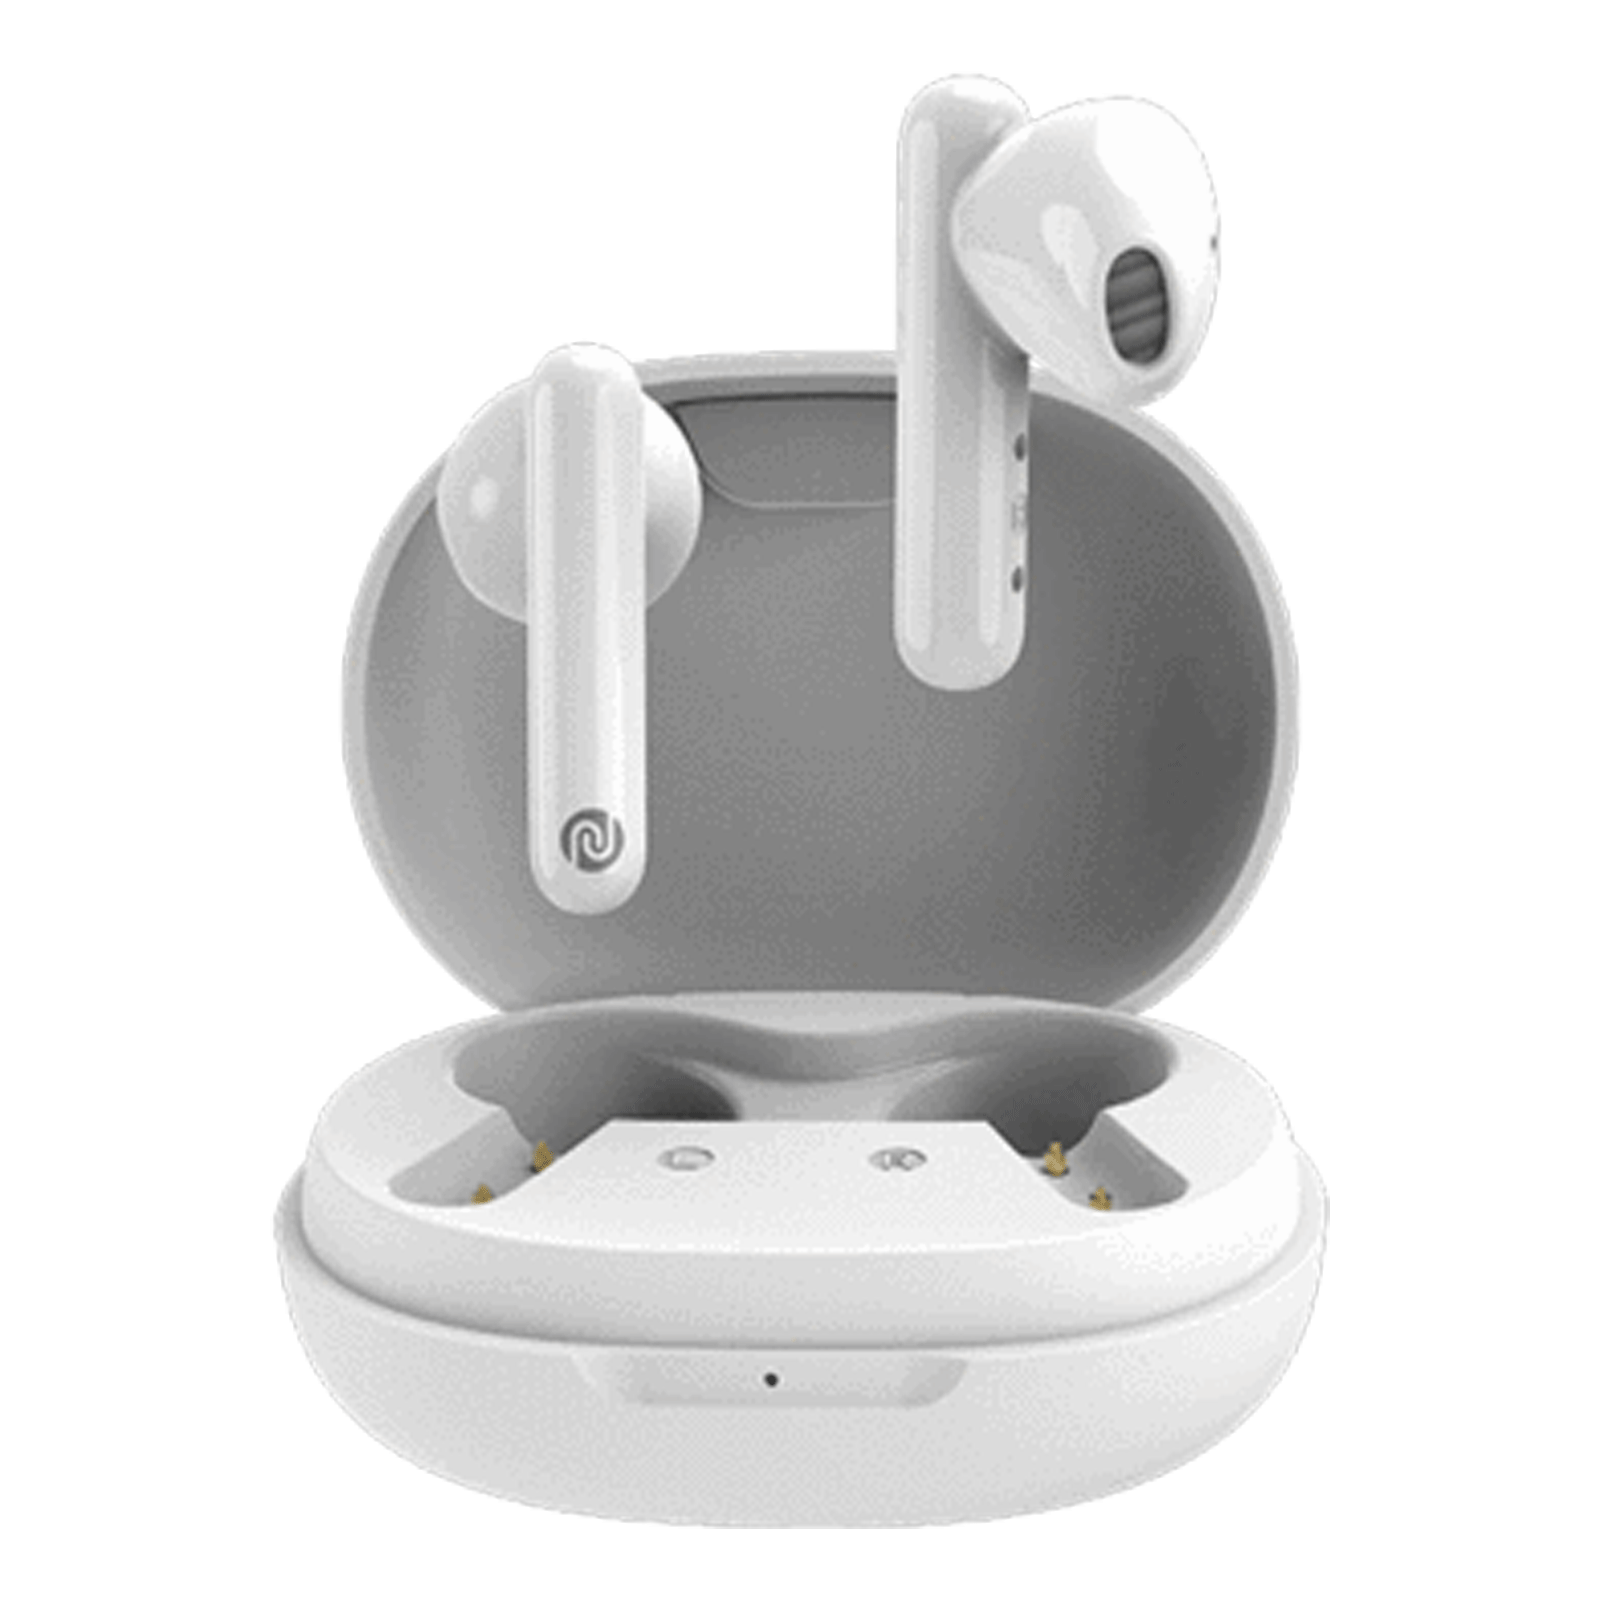 Noise Air Buds In-Ear Truly Wireless Earbuds with Mic (Bluetooth 5.0, 20-Hour Playtime, White)_1